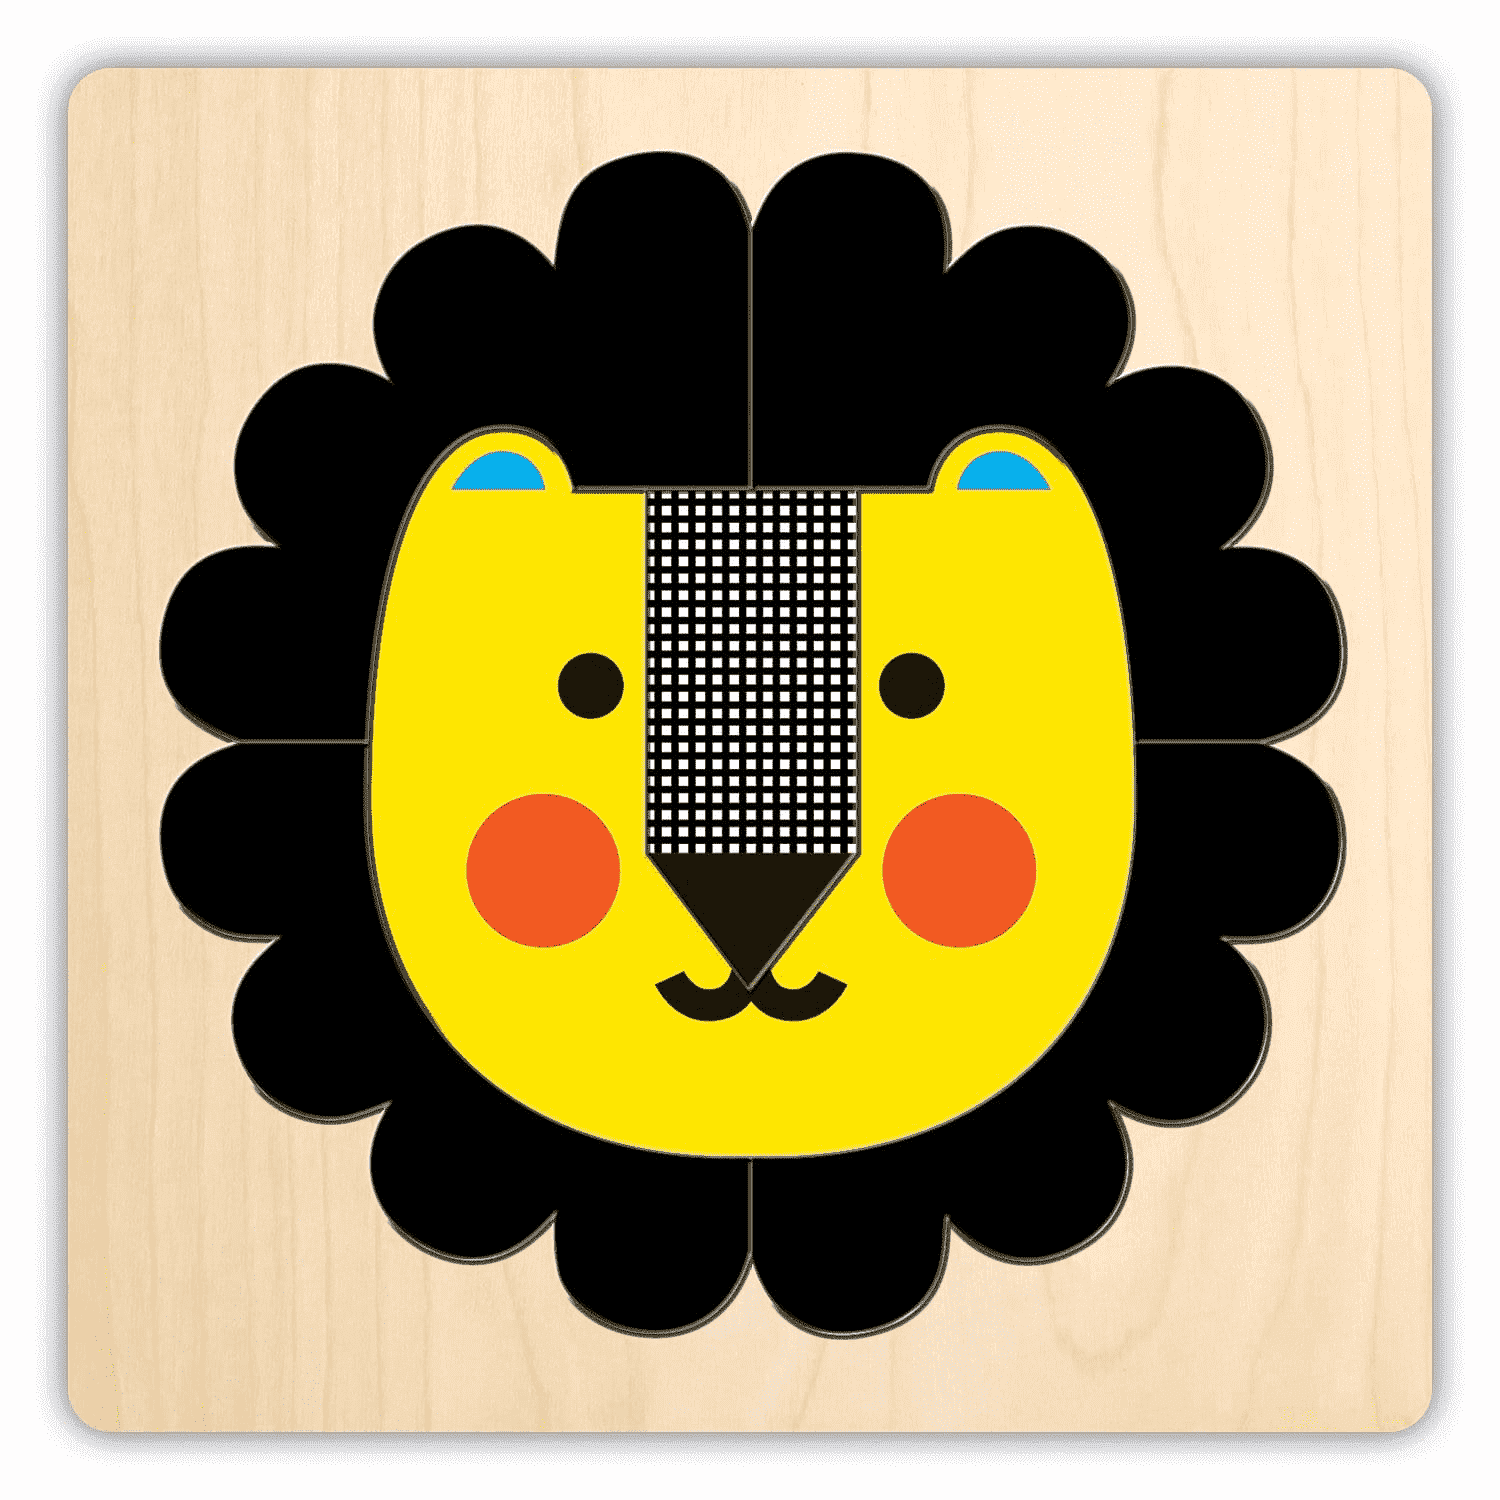 Download Buy Mudpuppy - 4 Layer Wooden Puzzle - Animal Face